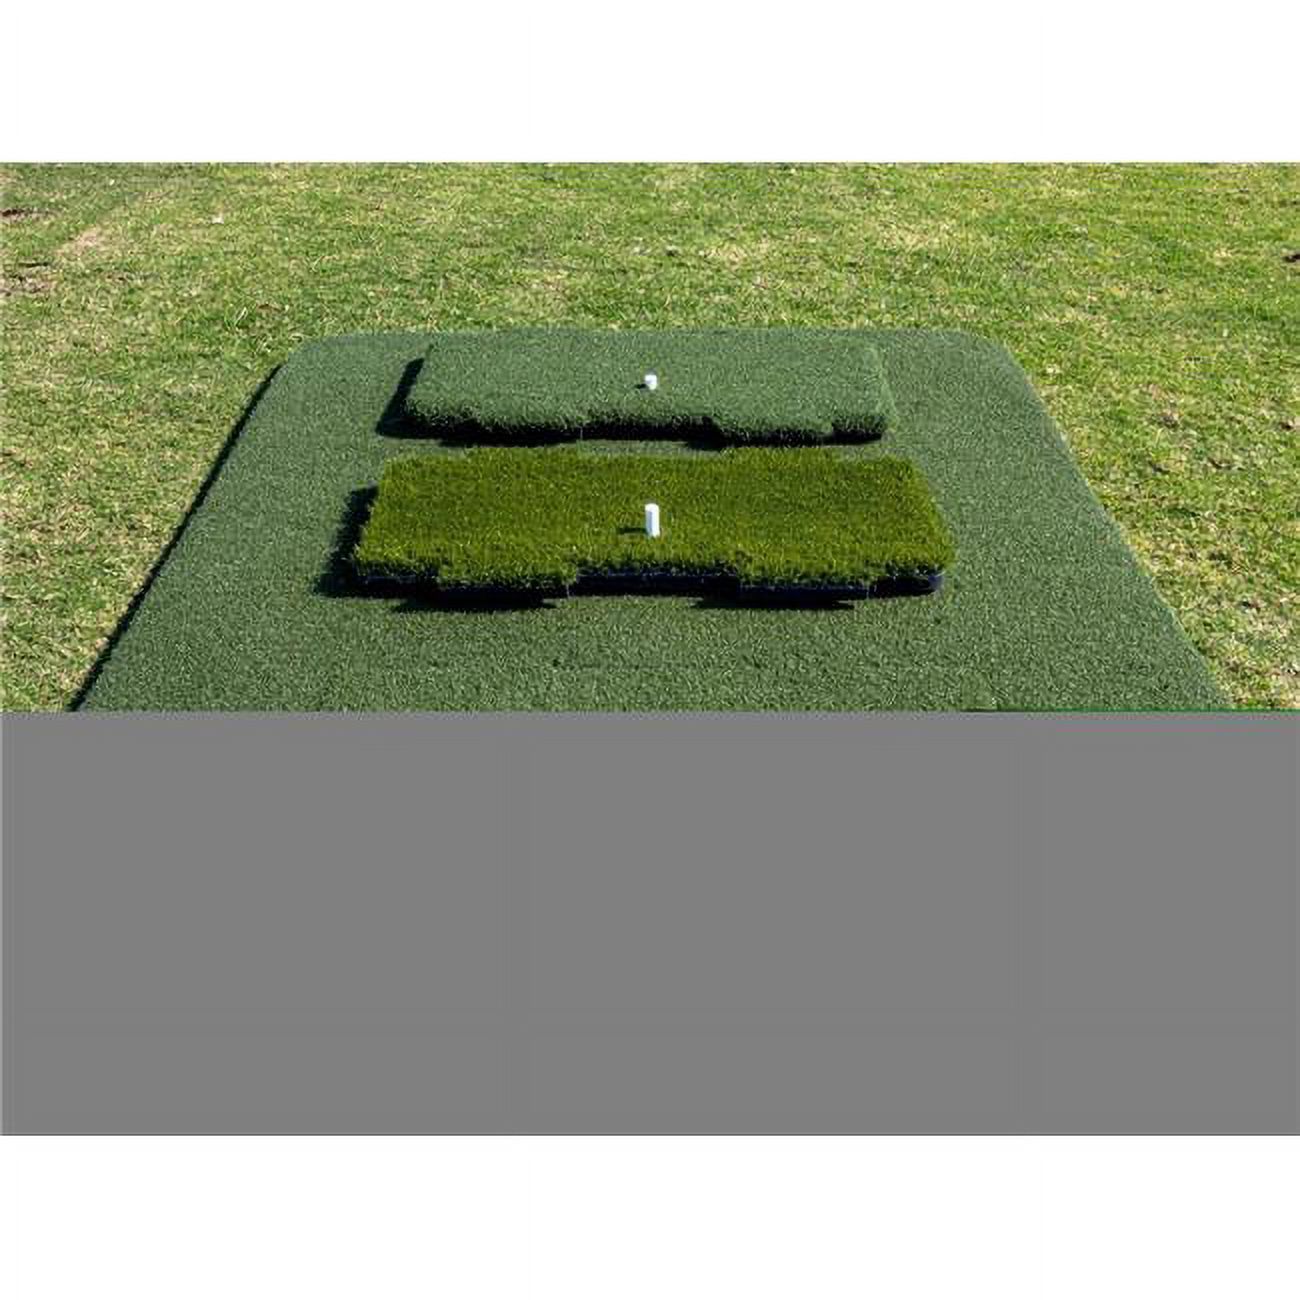 Tour Pro Elite MA000028 3 ft. 10 in. x 4 ft. 10 in. Interchangeable Three In One Golf Mat - image 1 of 1